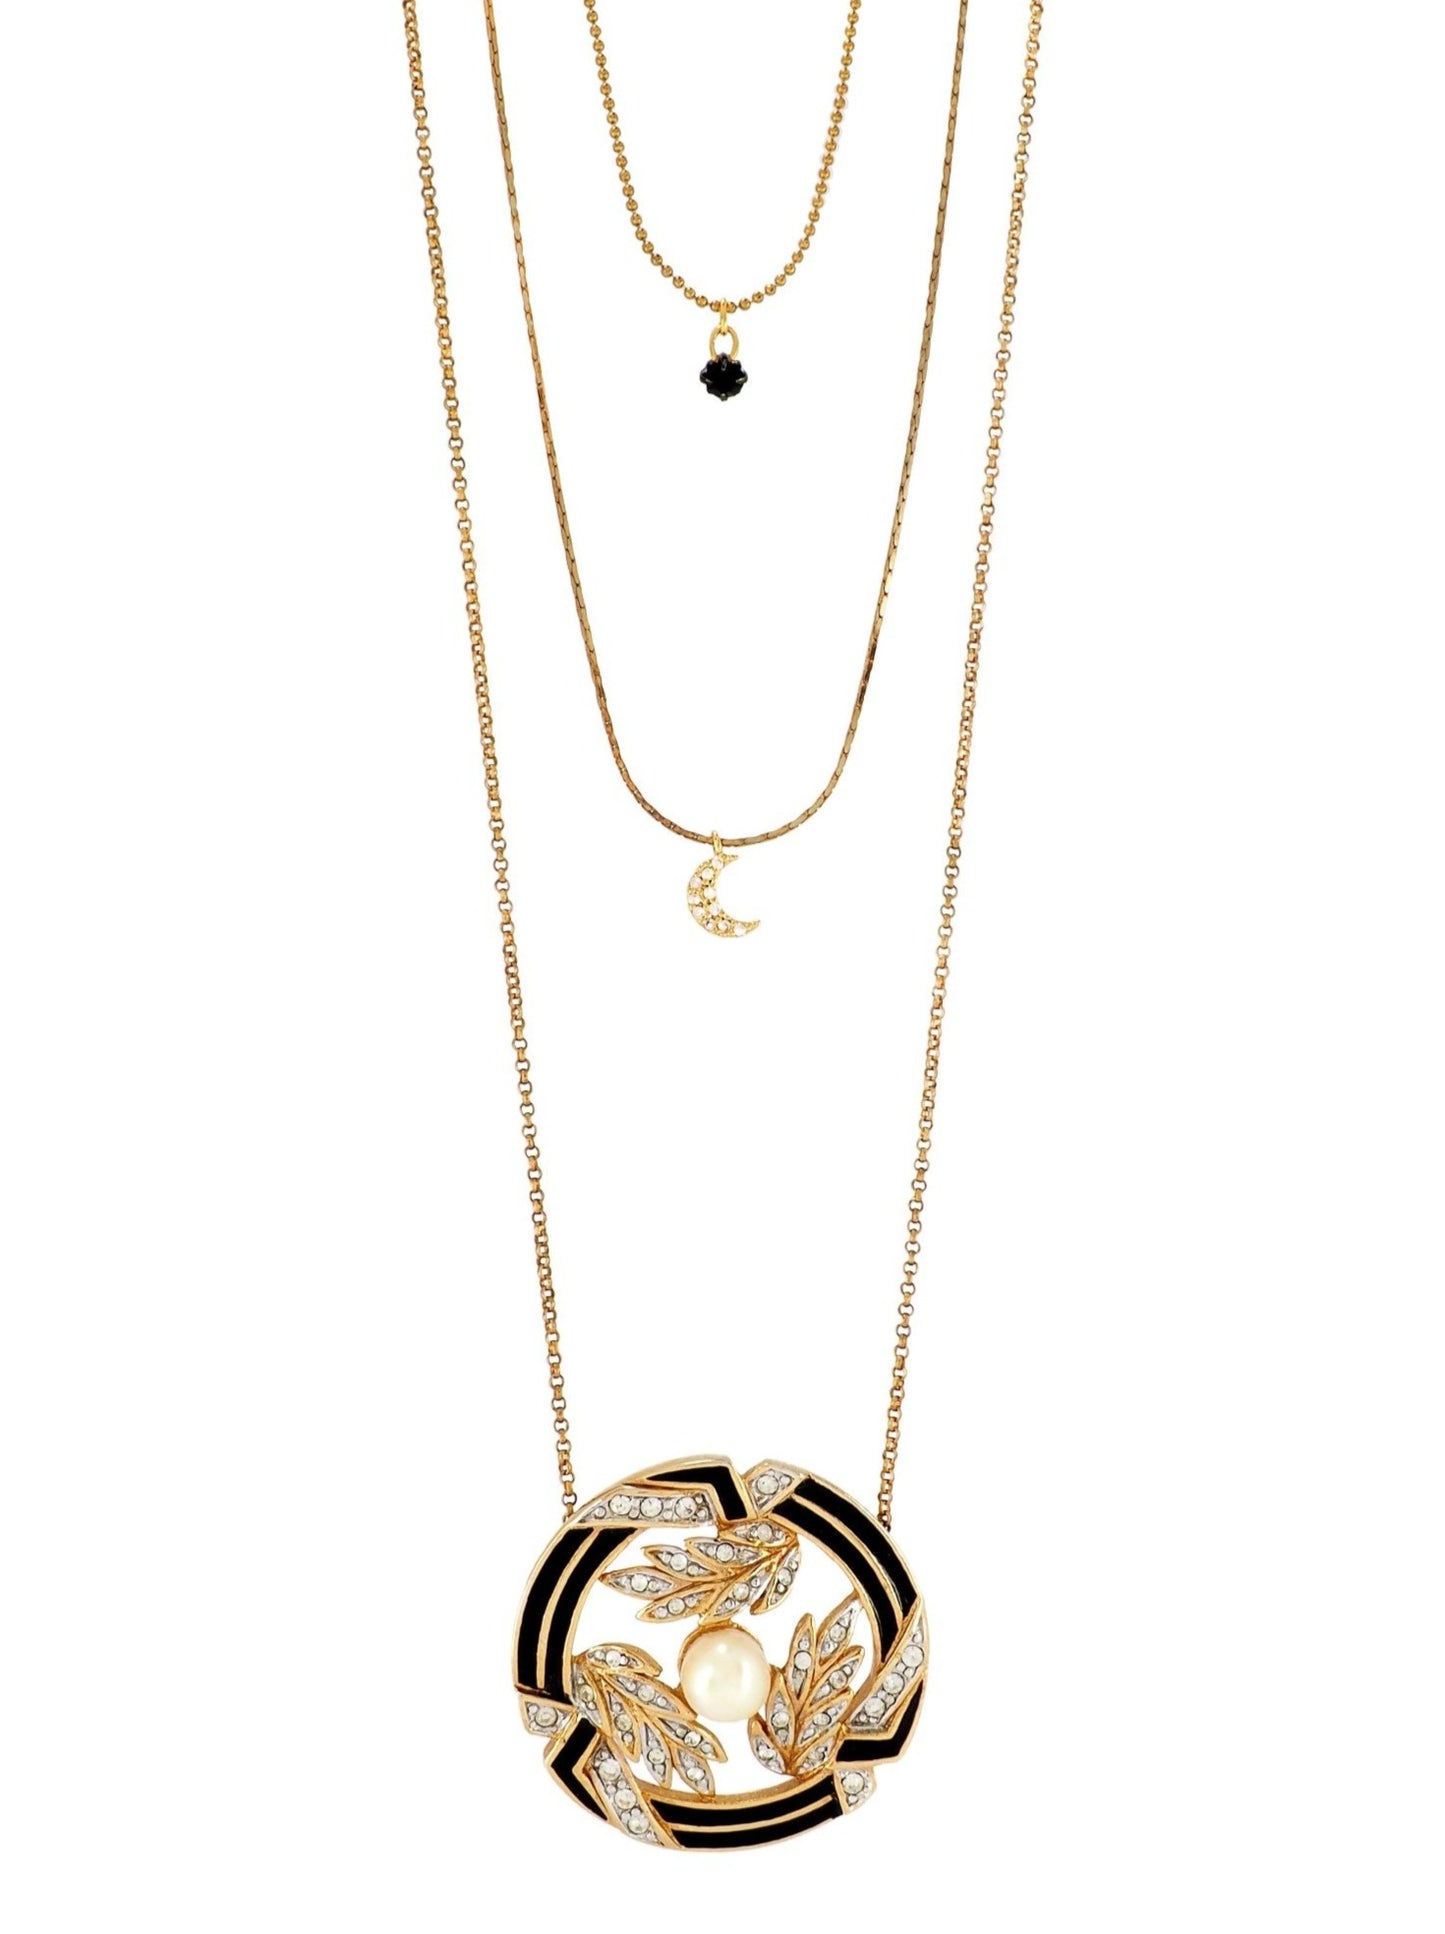 Three layered Gold plated Necklace. Featuring a beautiful vintage Pearl and Black Enamel pendant from France, a dainty Crescent Moon both incrusted with tiny Rhinestones and a small Black Quartz.